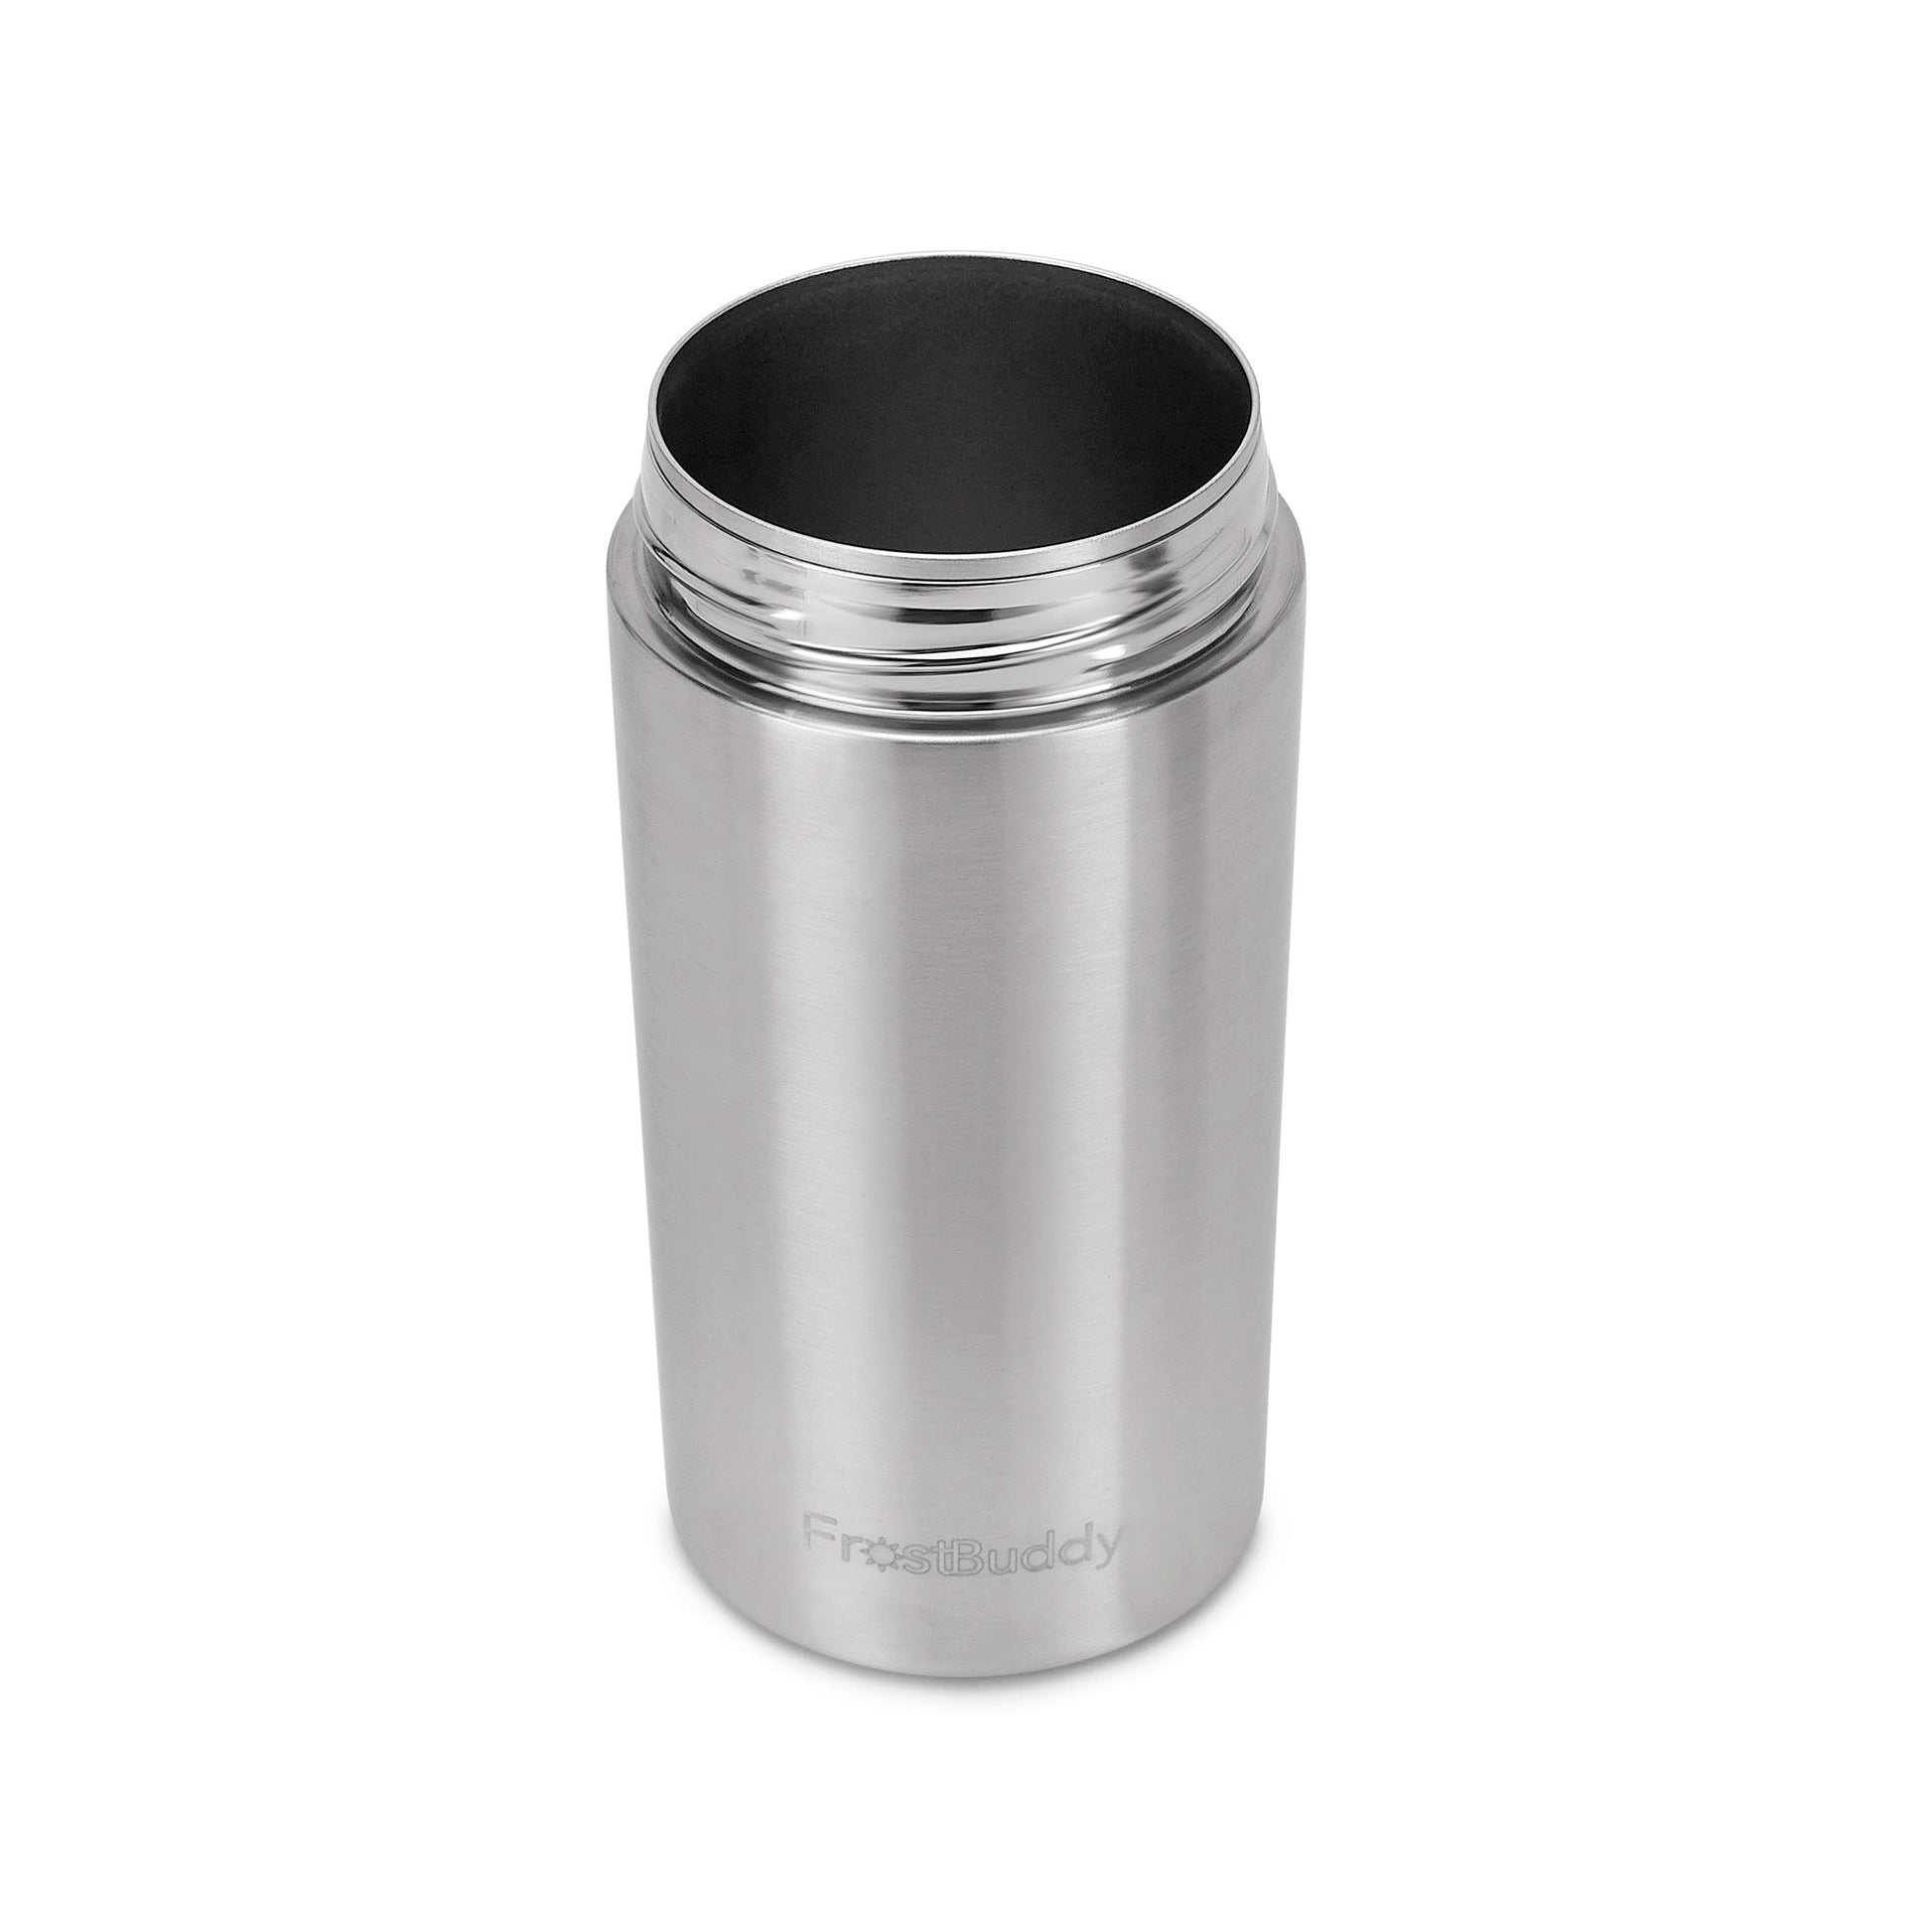 30 oz. Frost Buddy To-Go Tumblers